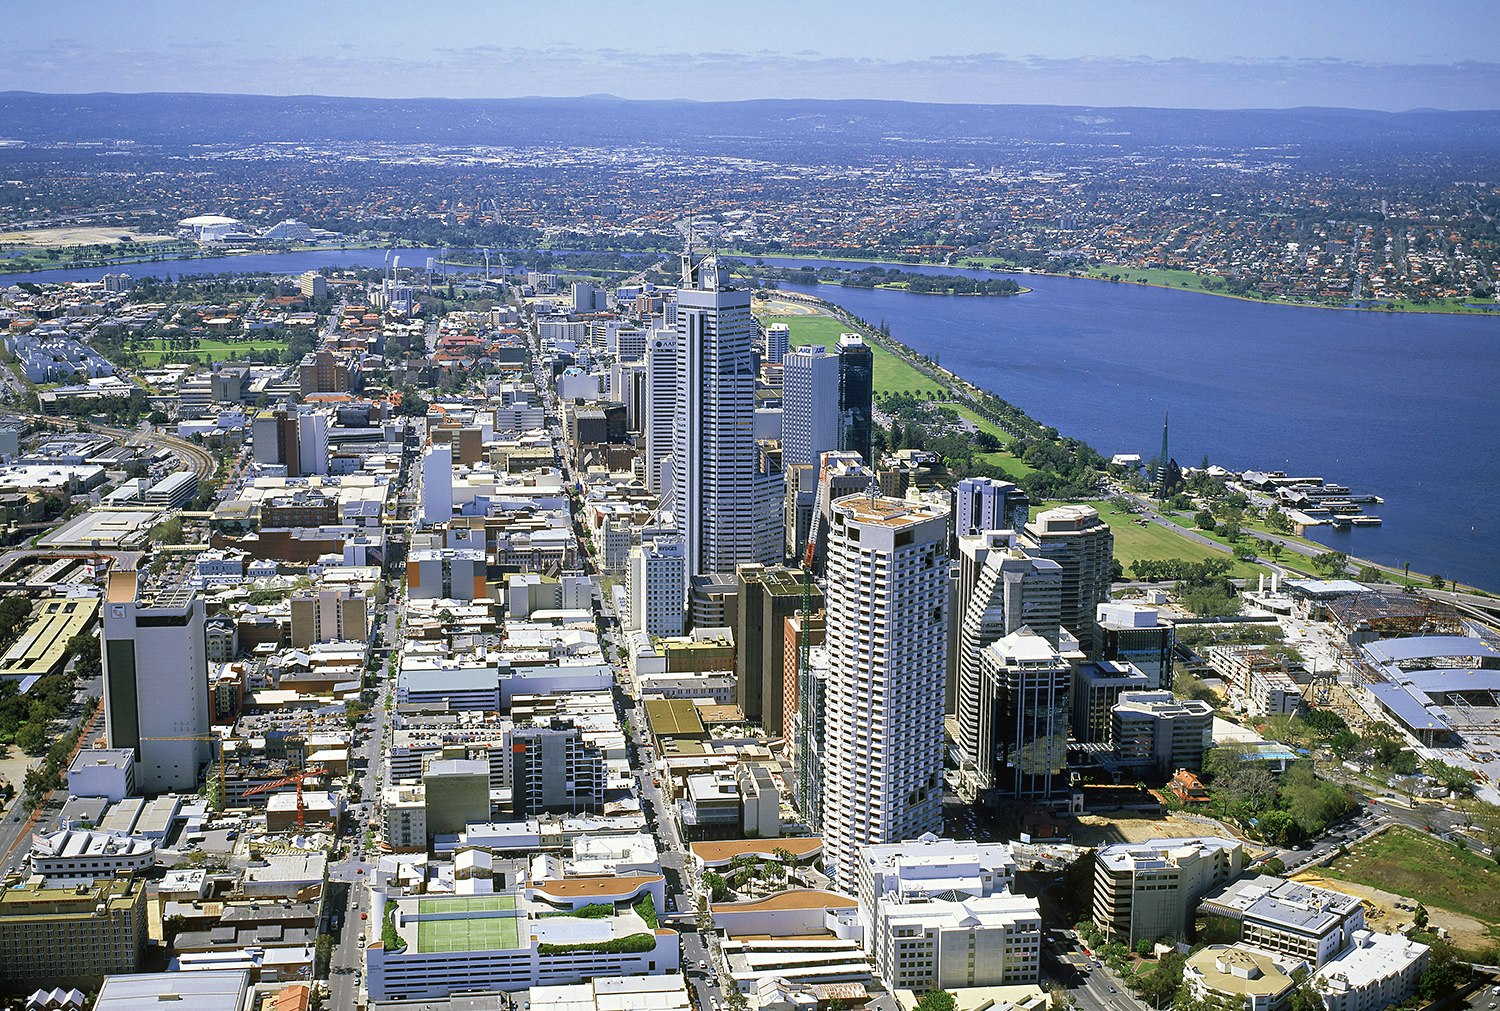 Flashy urban skyline, river views and excellent coffee on every corner, Perth is a superb spot for a weekend break. Image by Photograph by David / Photolibrary / Getty Images